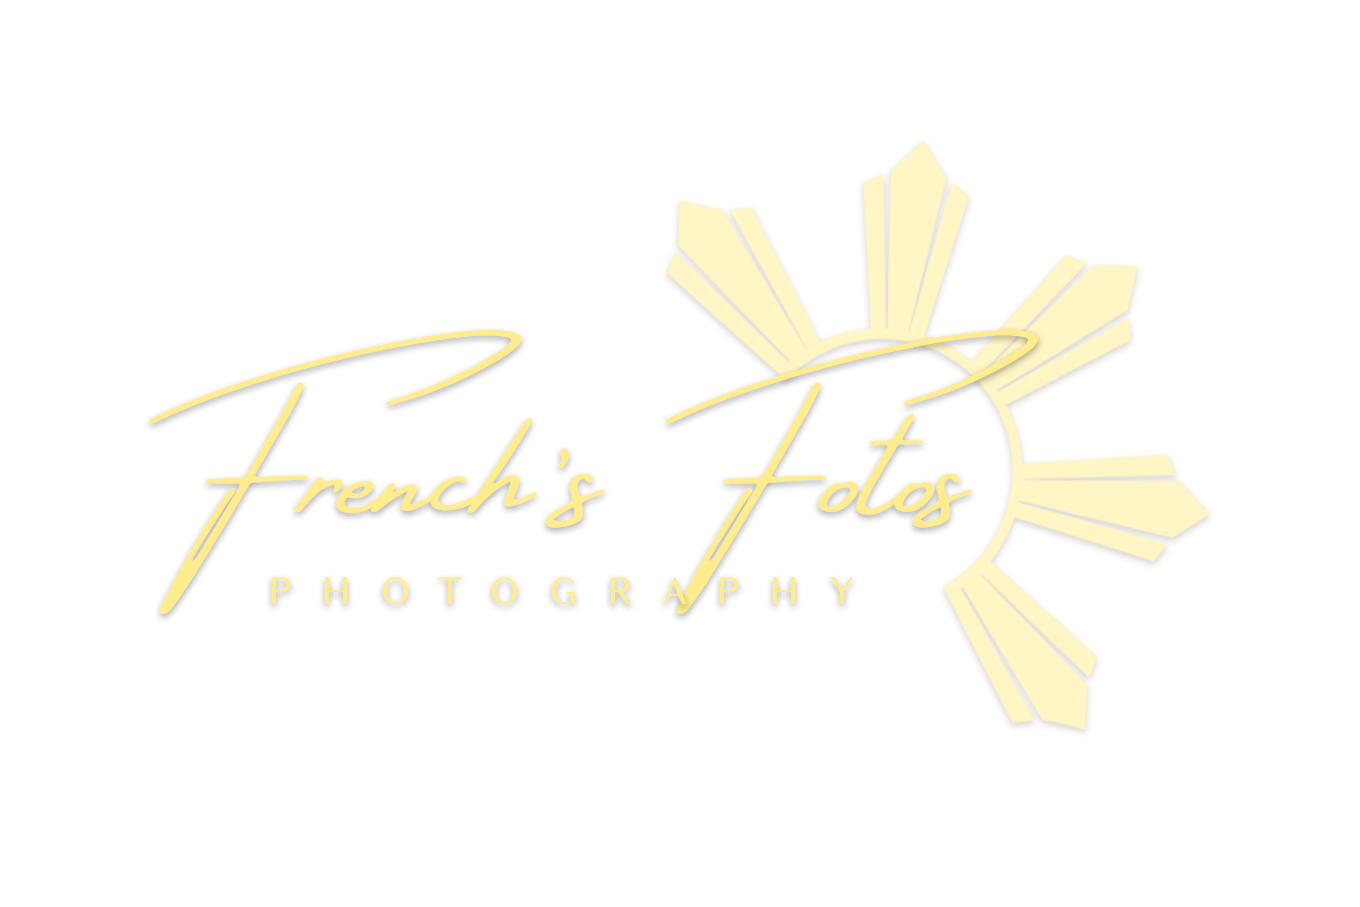 French&#39;s Fotos Photography | Southern ME, Boston, and New England Photographer